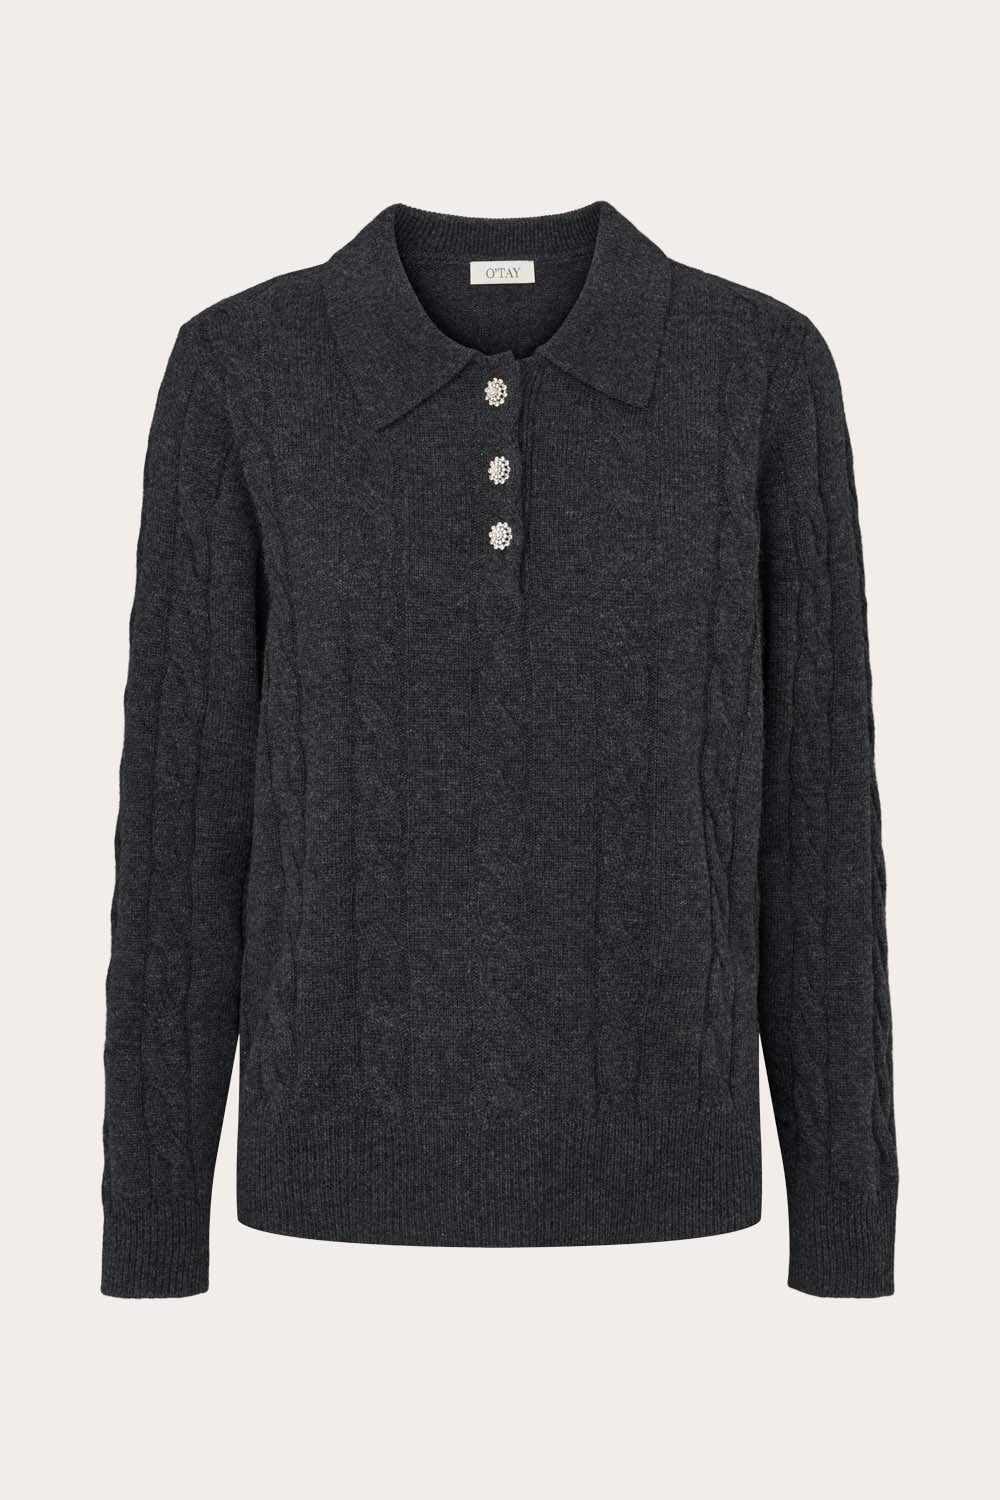 O'TAY Dolly Sweater Bluser Charcoal